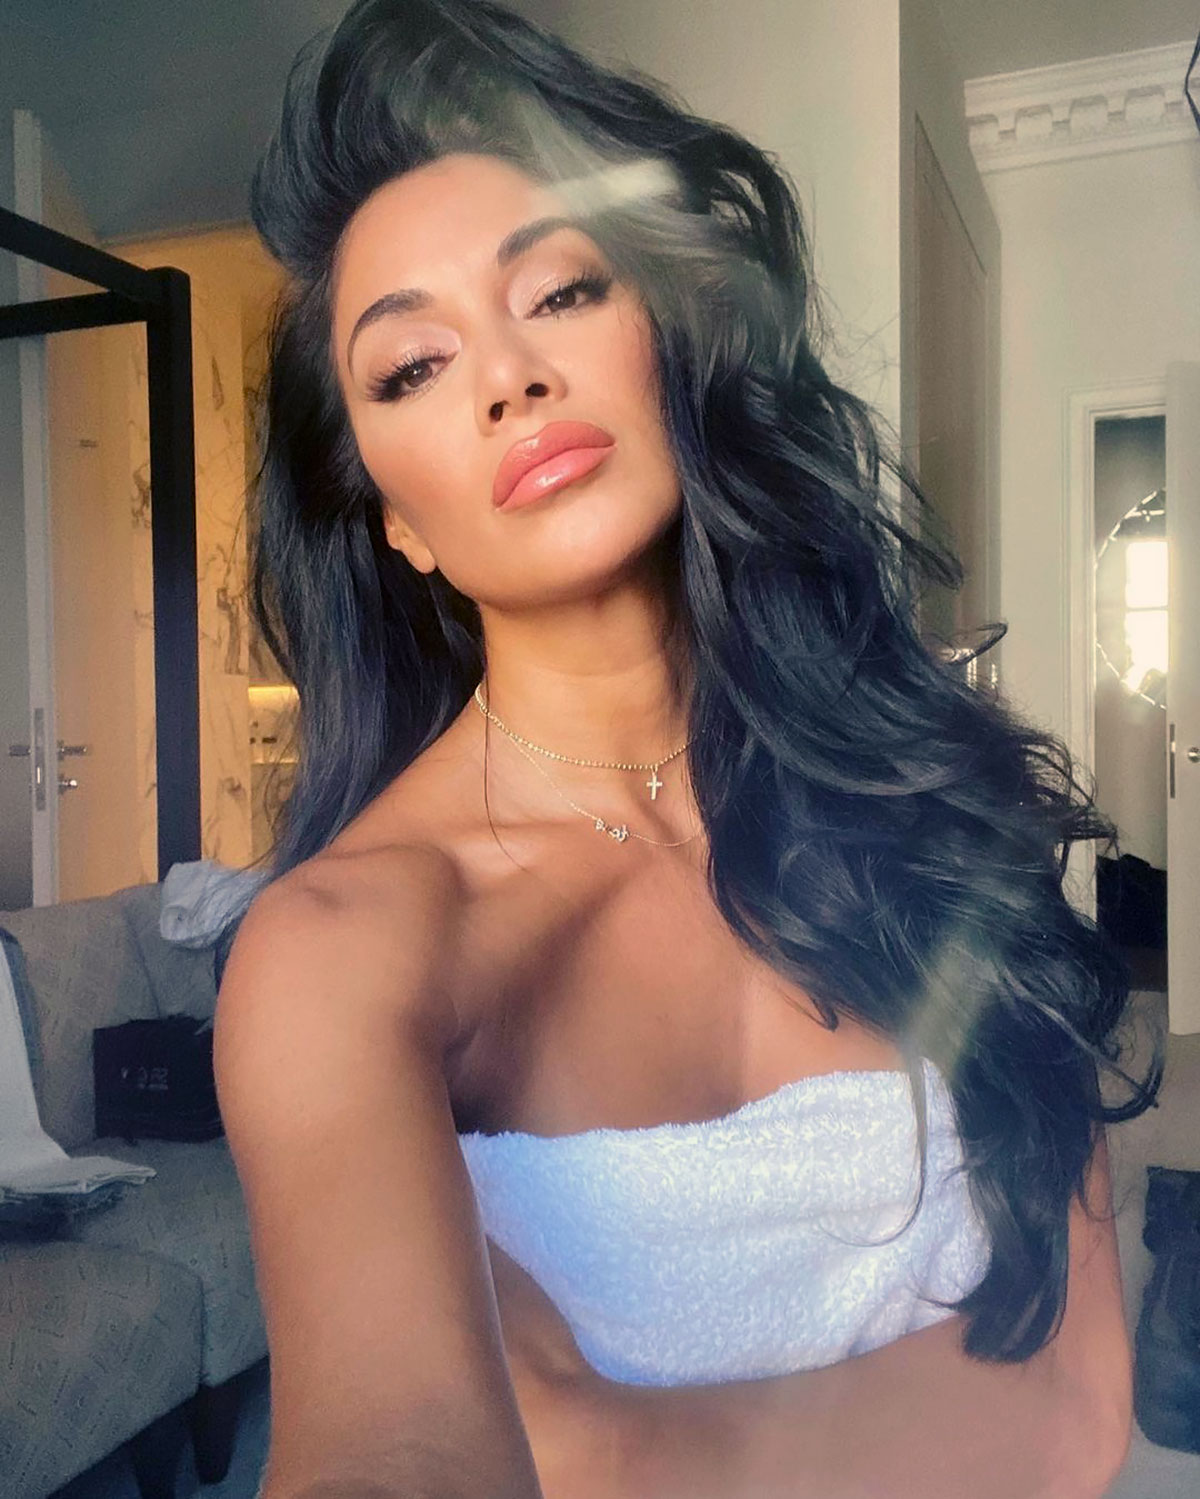 Nicole Scherzinger Gets ‘Dolled Up’ in Nothing But a Towel